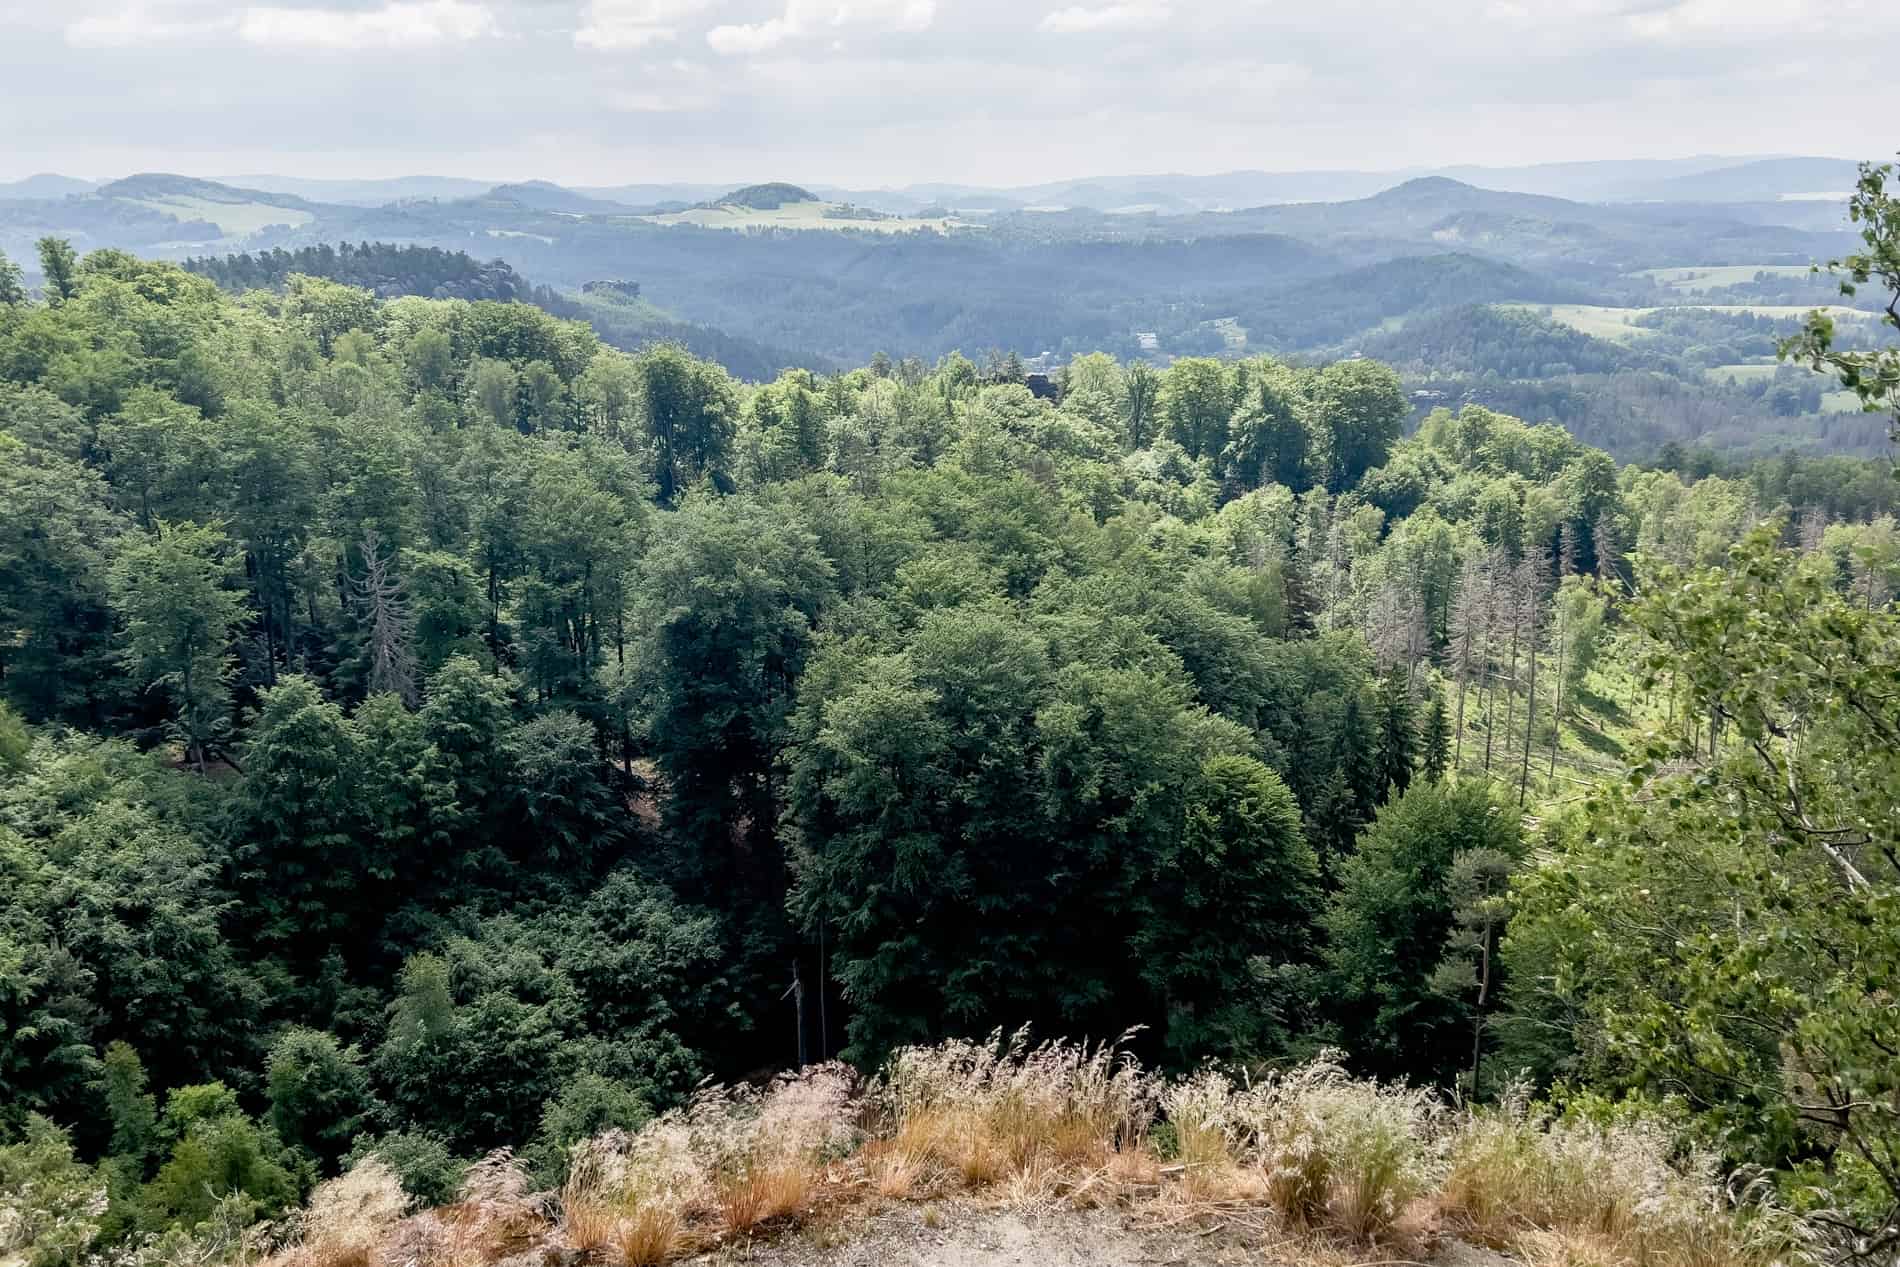 Elevated views over the rolling hills and forest patchwork of Bohemian Switzerland.